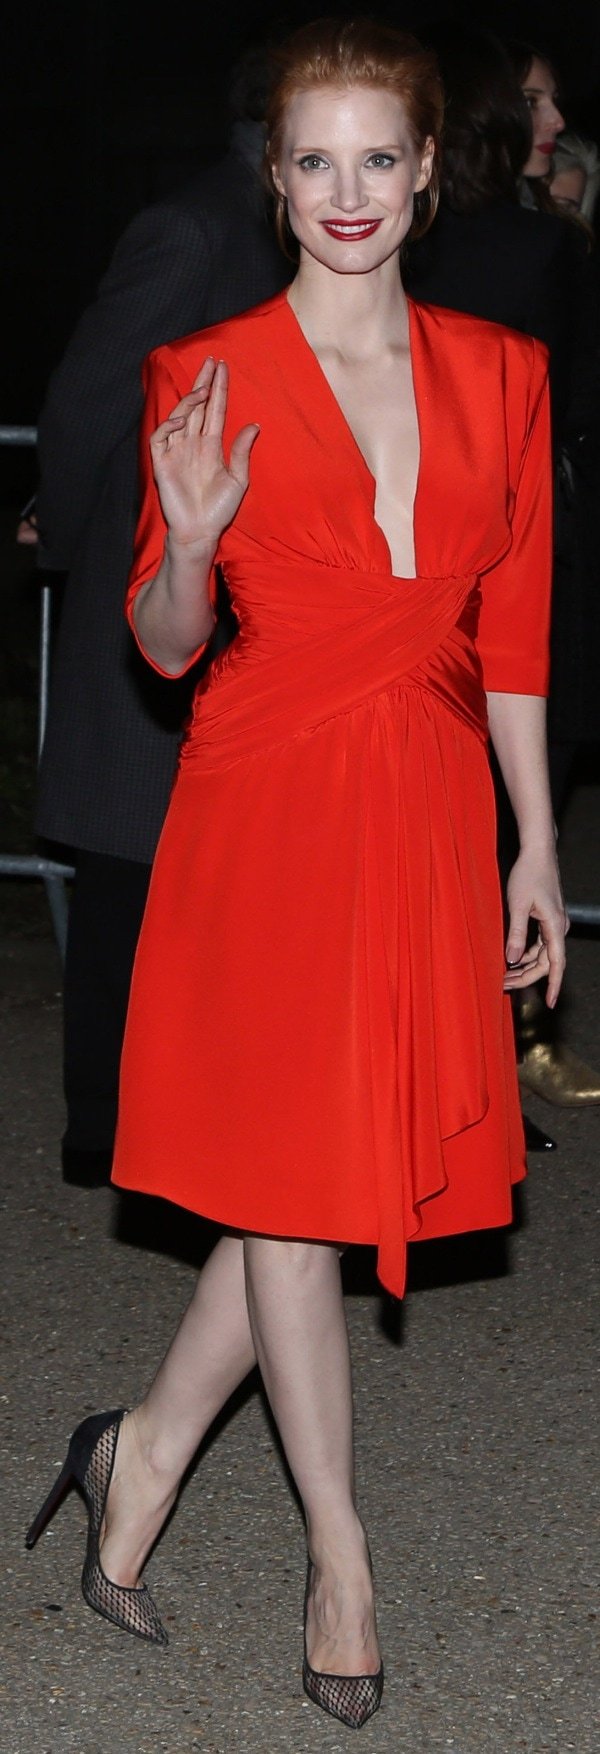 Jessica Chastain turned heads in a red dress at the Yves Saint Laurent show during Paris Fashion Week